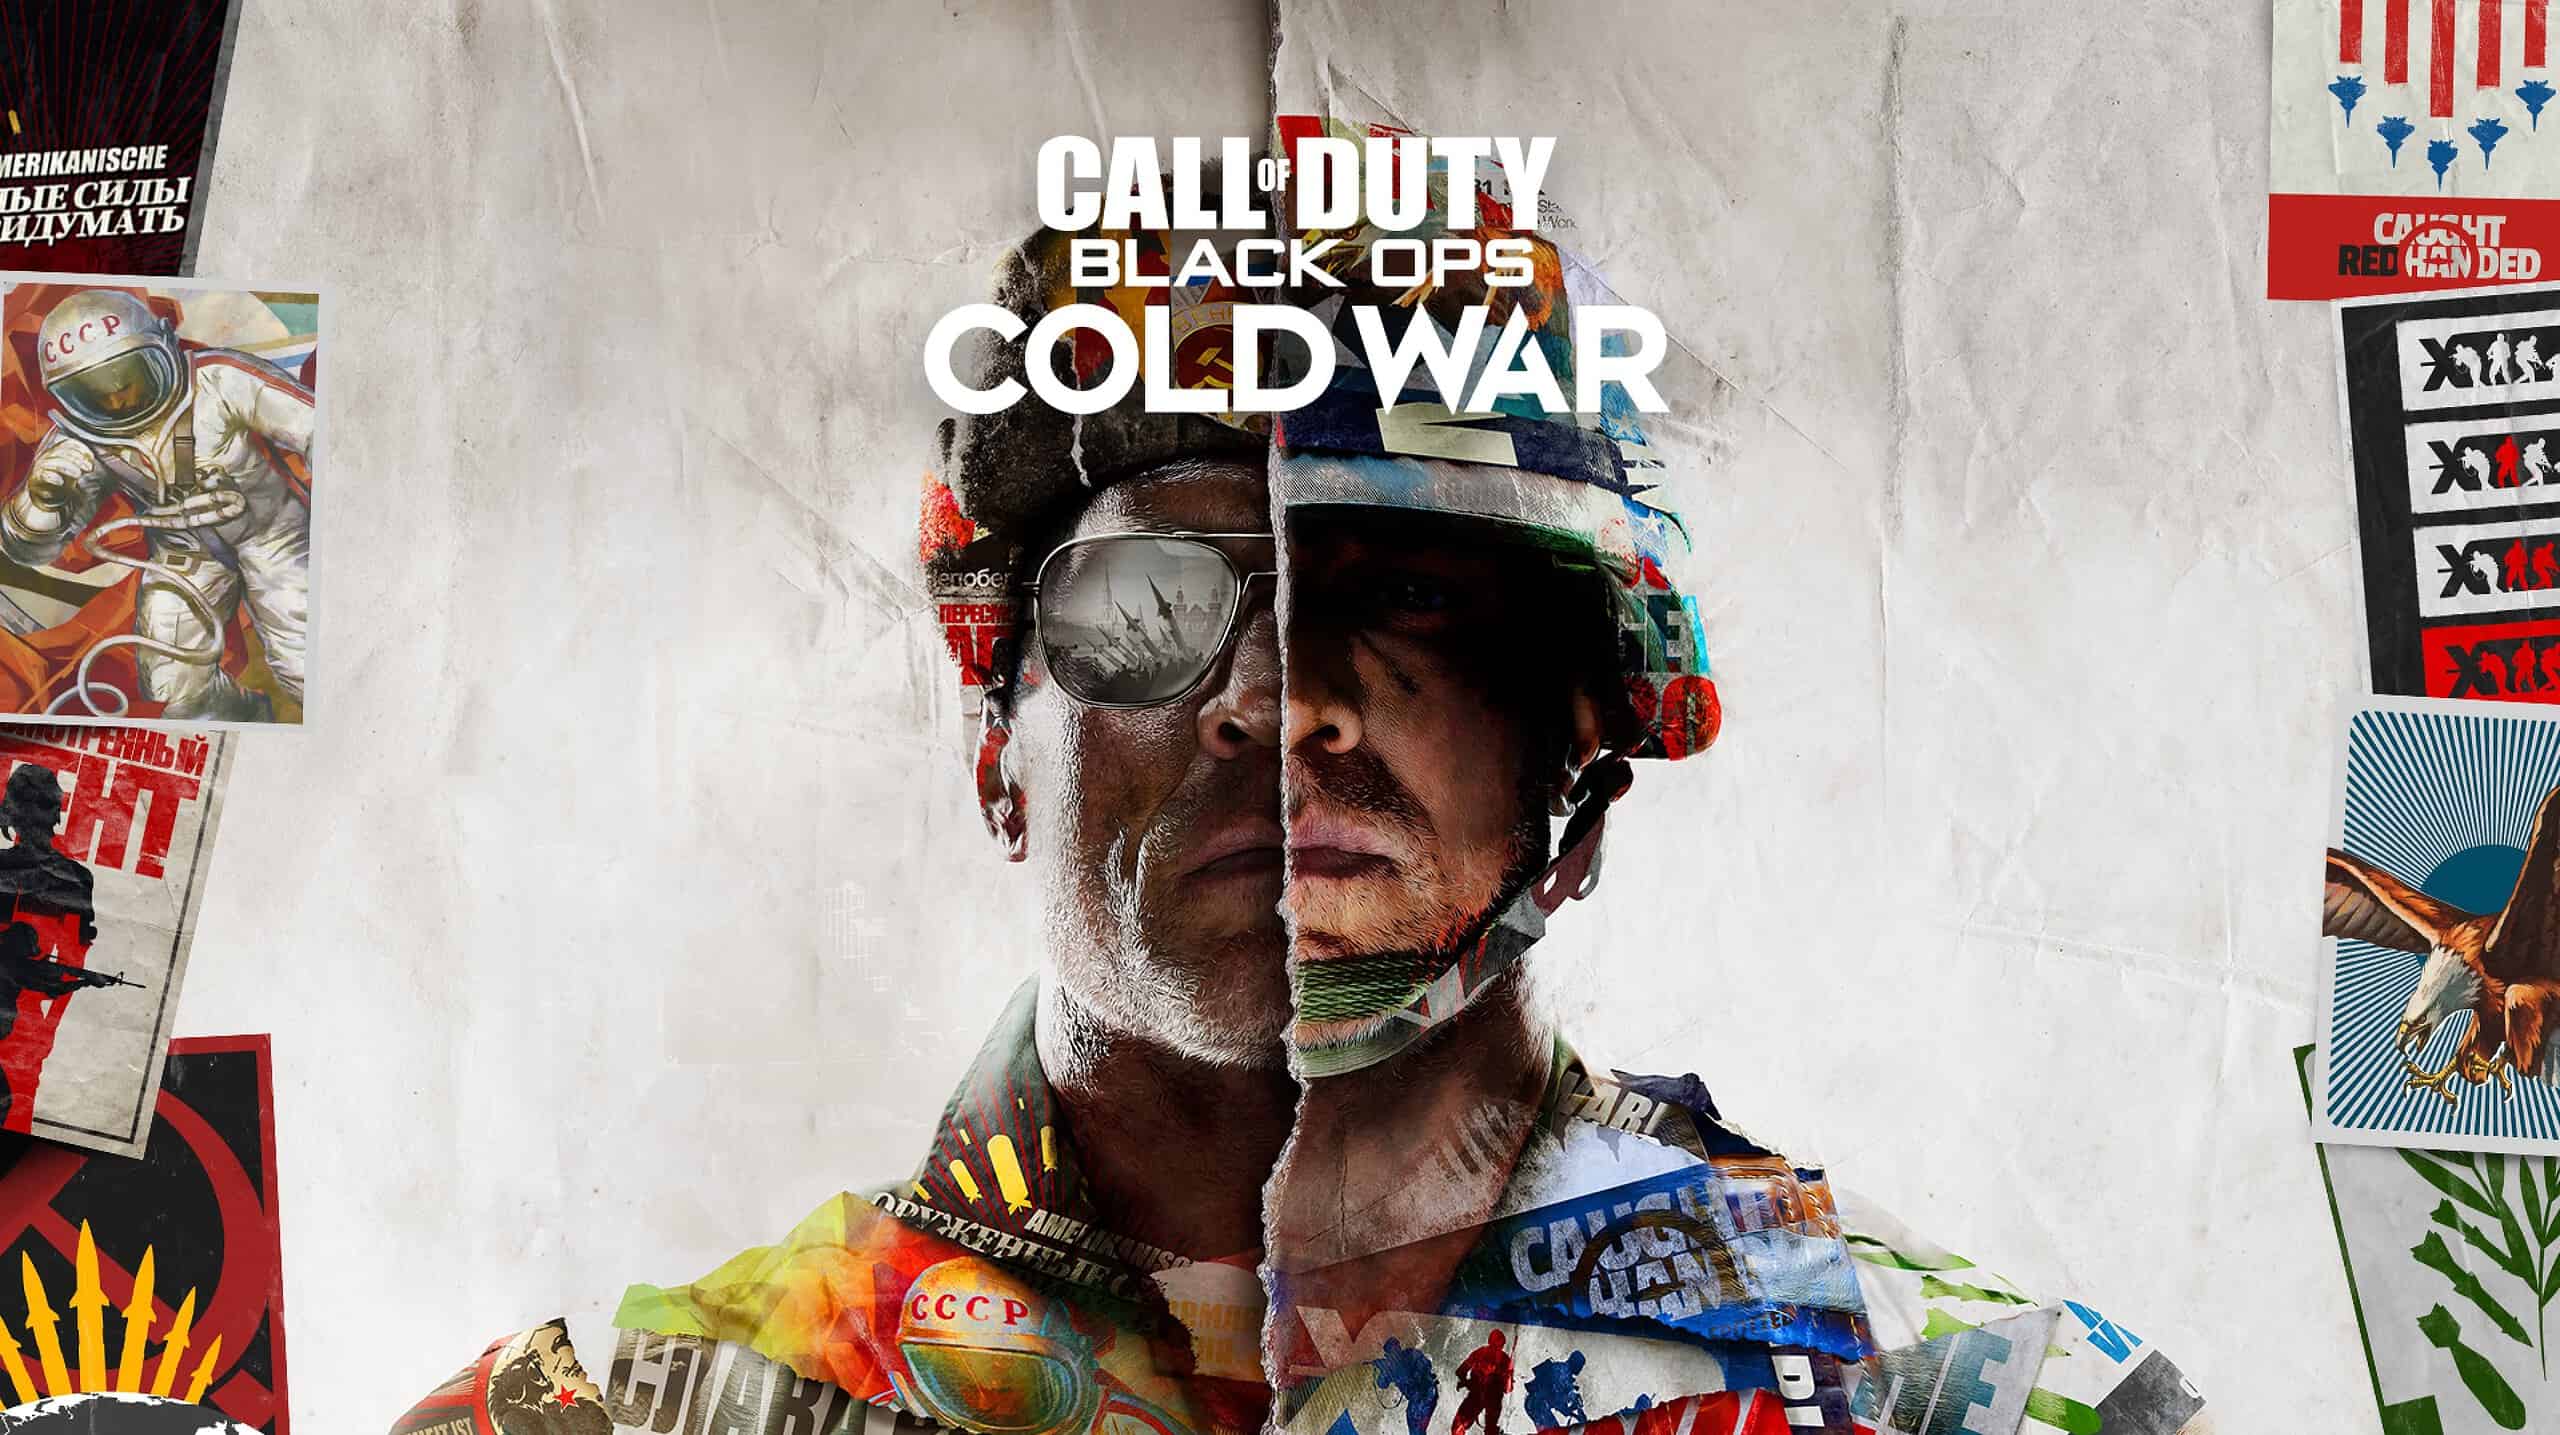 Call-of-Duty-Black-Ops-Cold-War-Promo-Banner